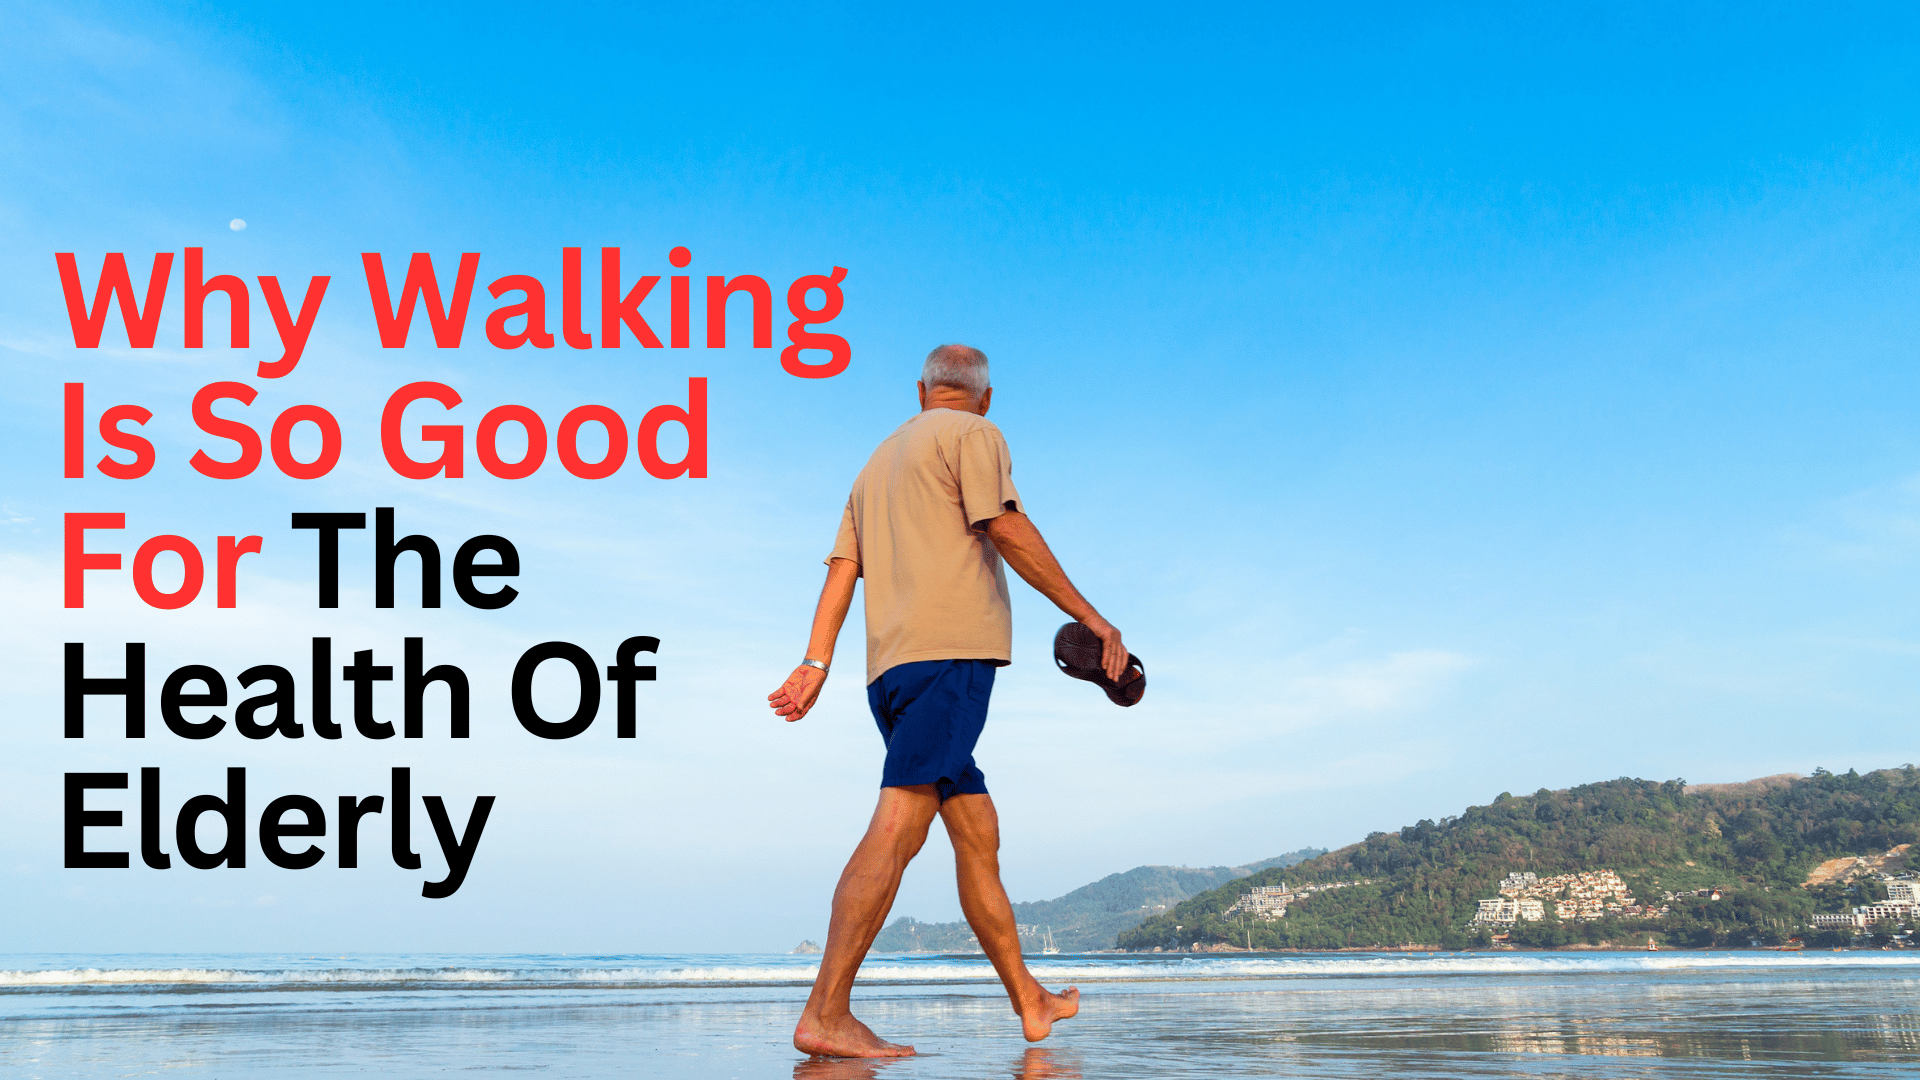 Why Walking Is So Good For The Health Of Elderly – Top 5 Benefits of Walking